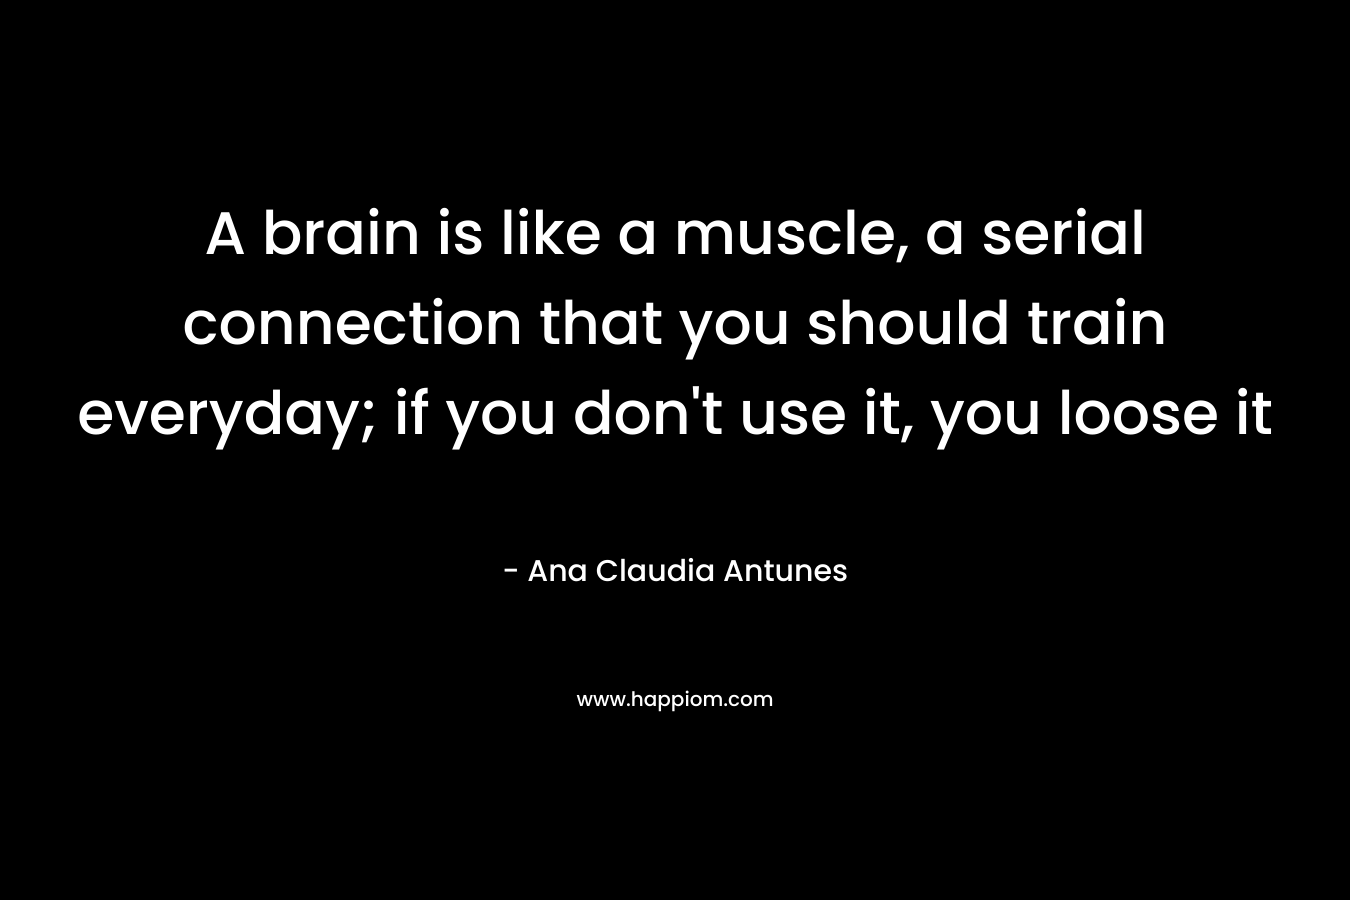 A brain is like a muscle, a serial connection that you should train everyday; if you don't use it, you loose it